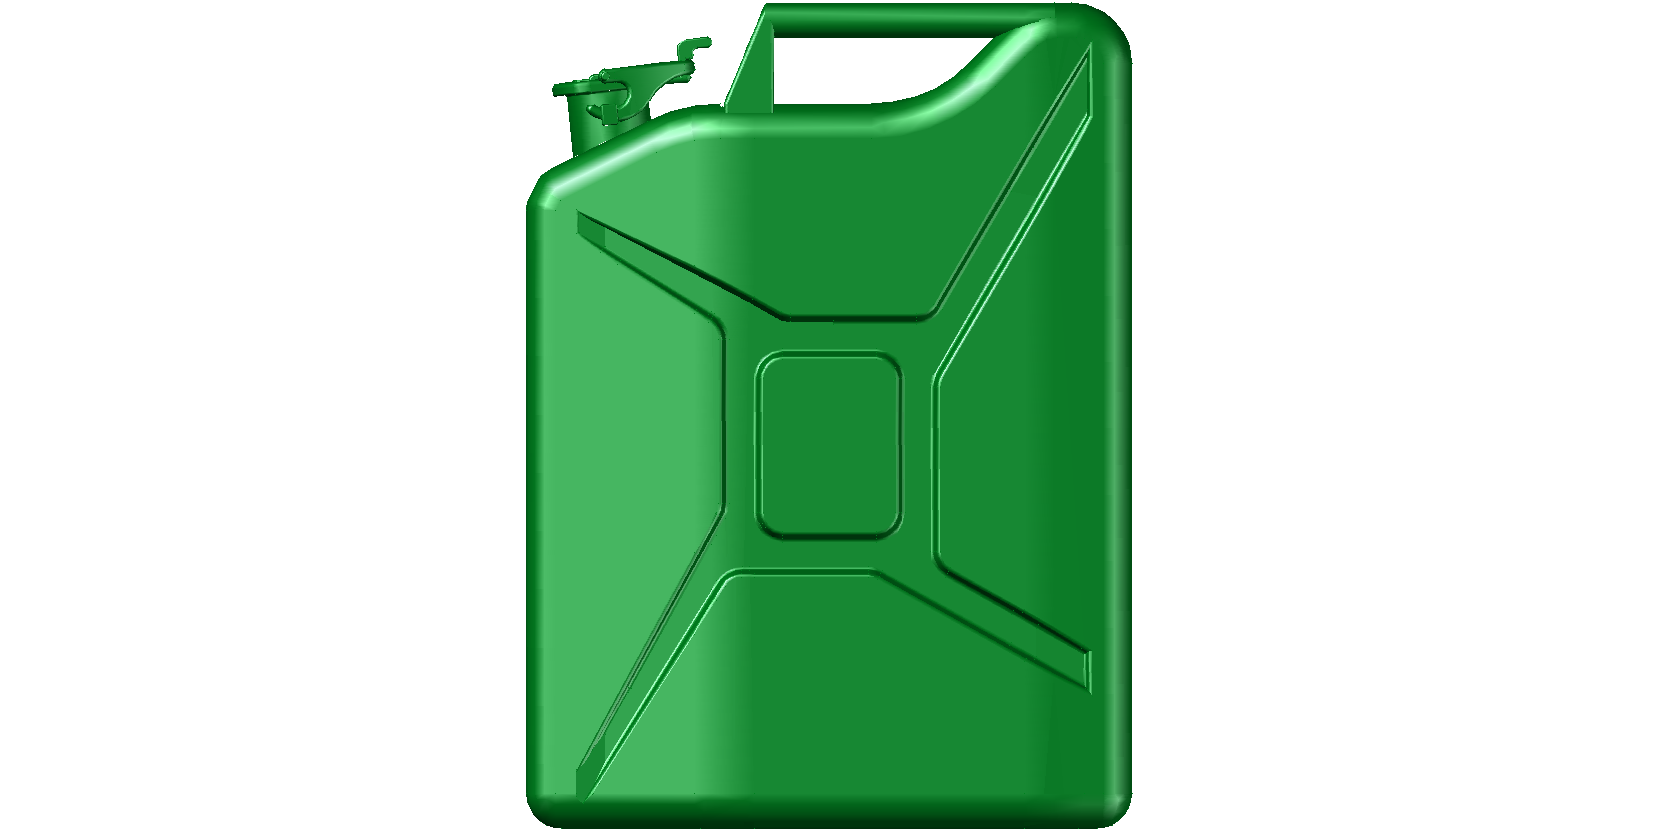 Jerrycan HD PNG - 90746